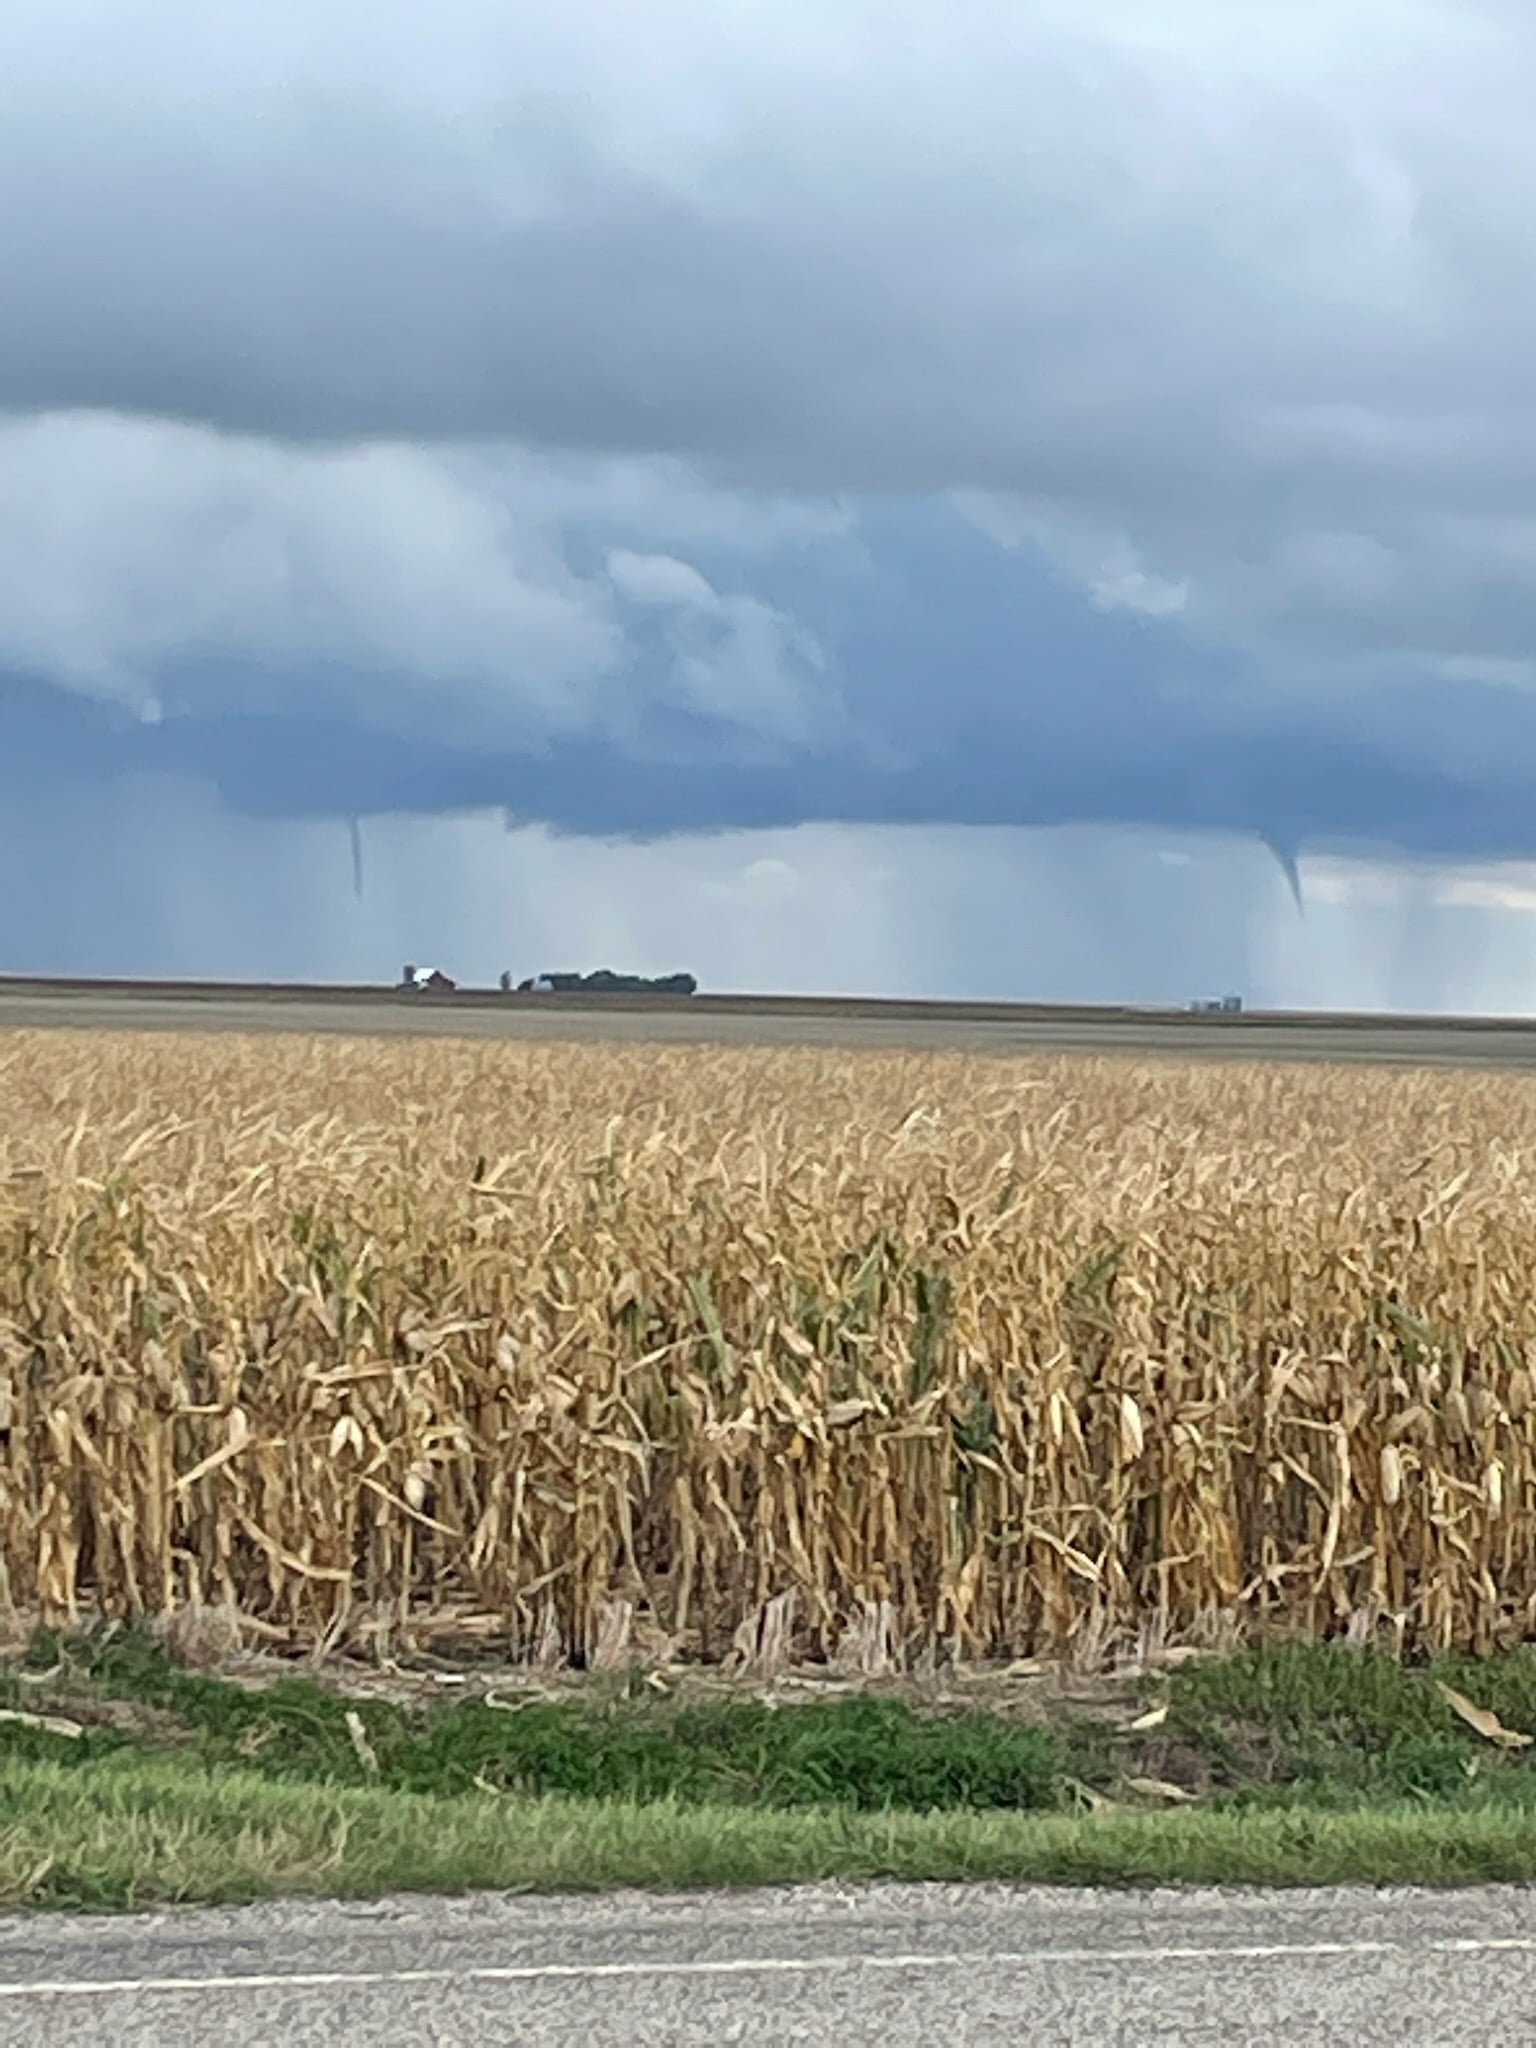 Two landspout funnels (one briefly touched down) located 4 miles west of Onida at approximately 1:15 PM.  (Photo from Sully County EM)